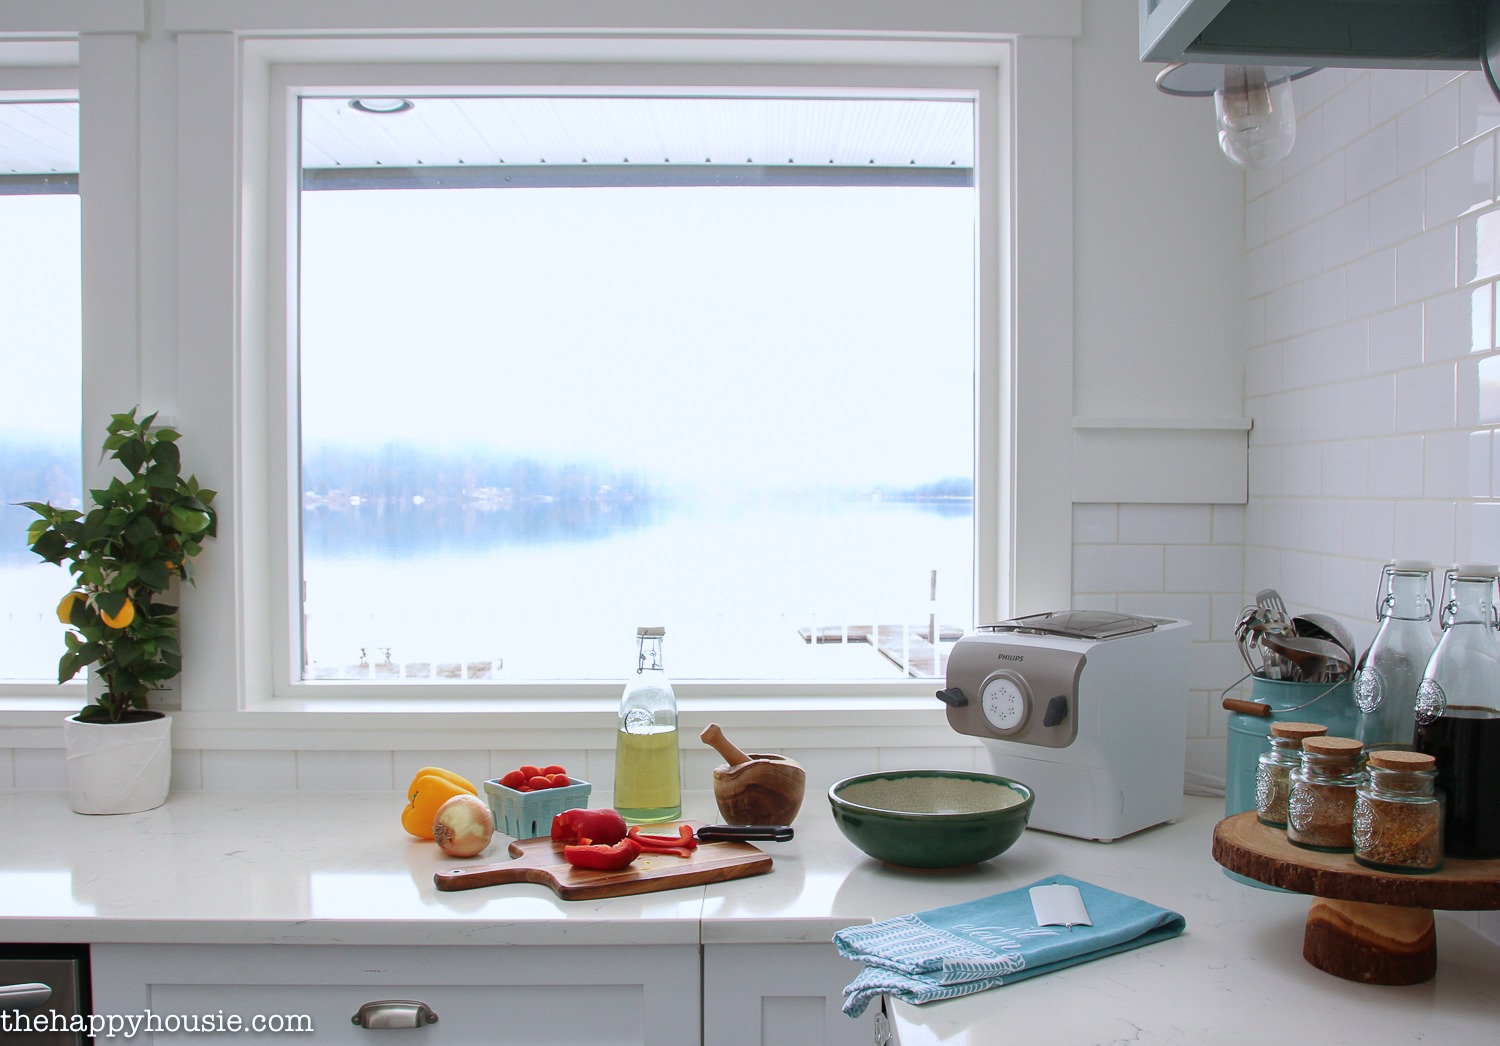 A large window overlooking the lake in the kitchen.